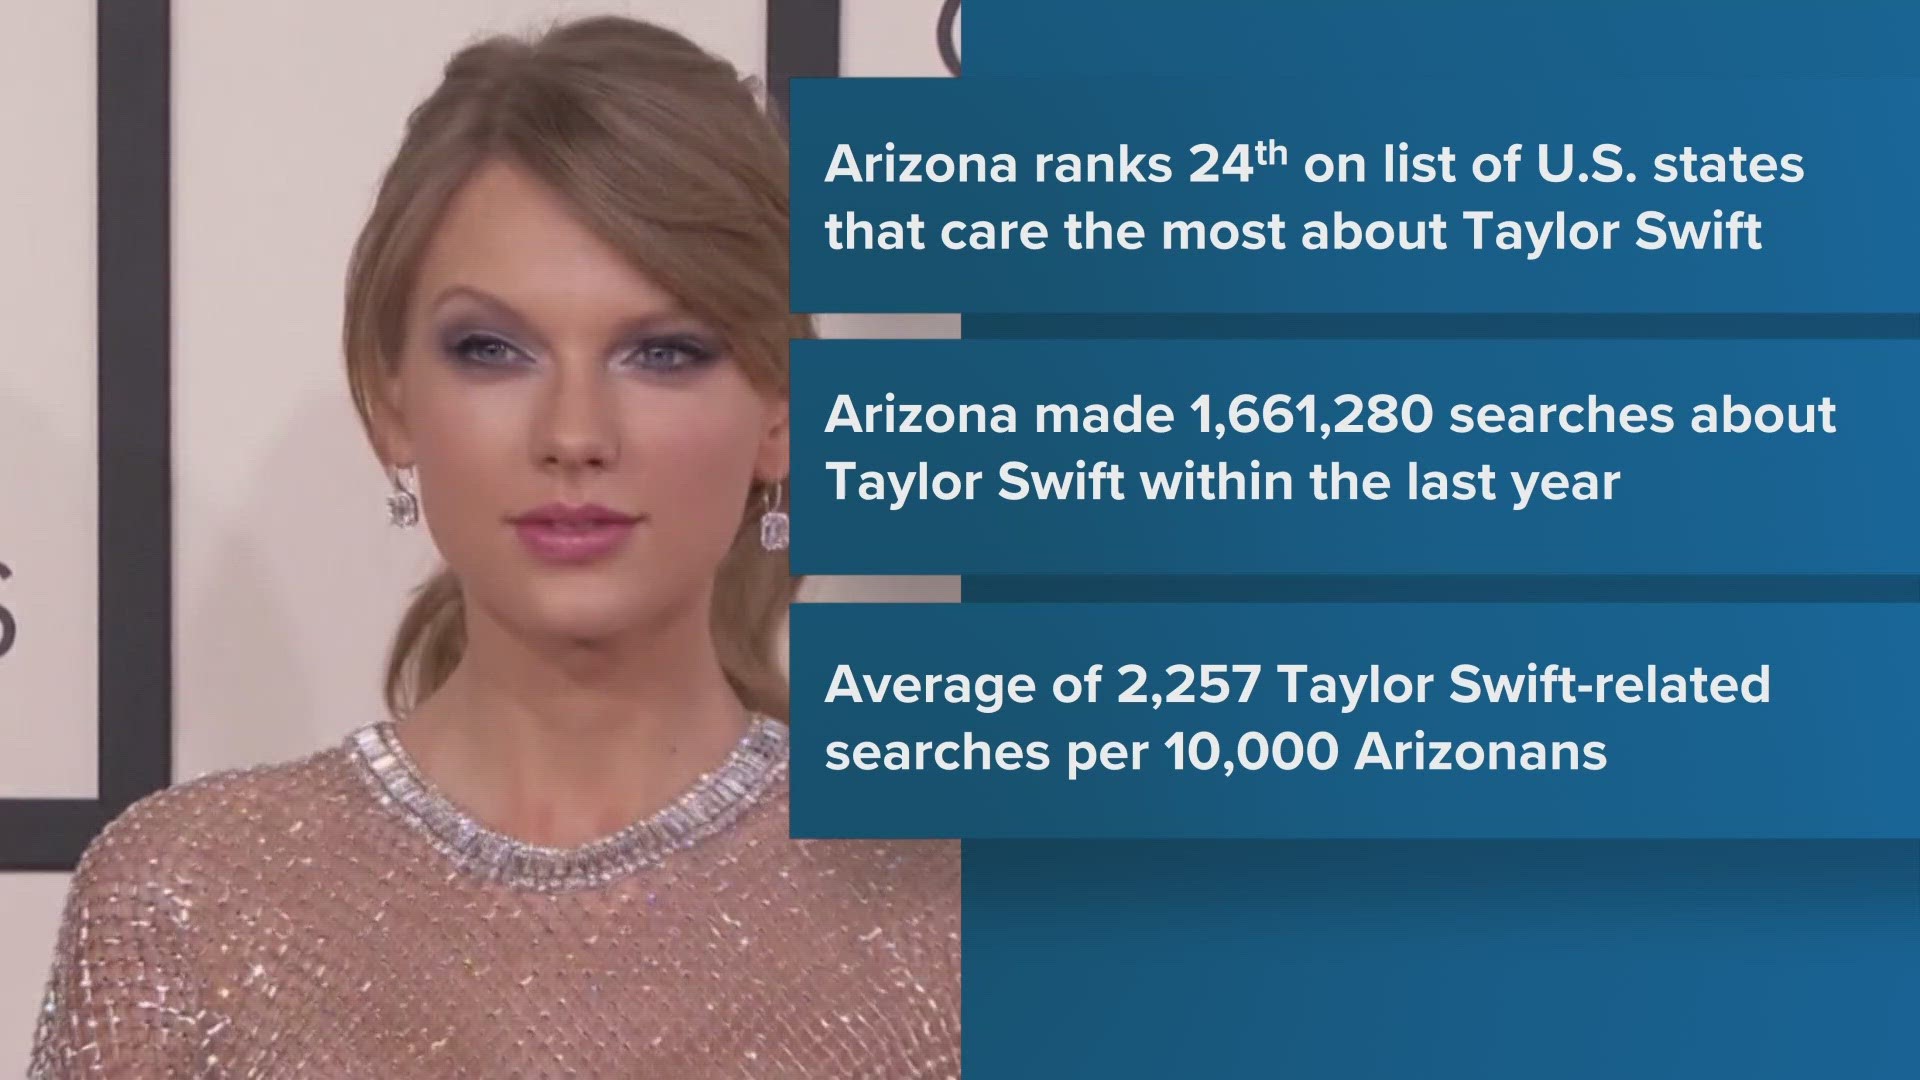 Taylor Swift is dominating the pop culture landscape right now. But how much interest is she generating in Arizona?